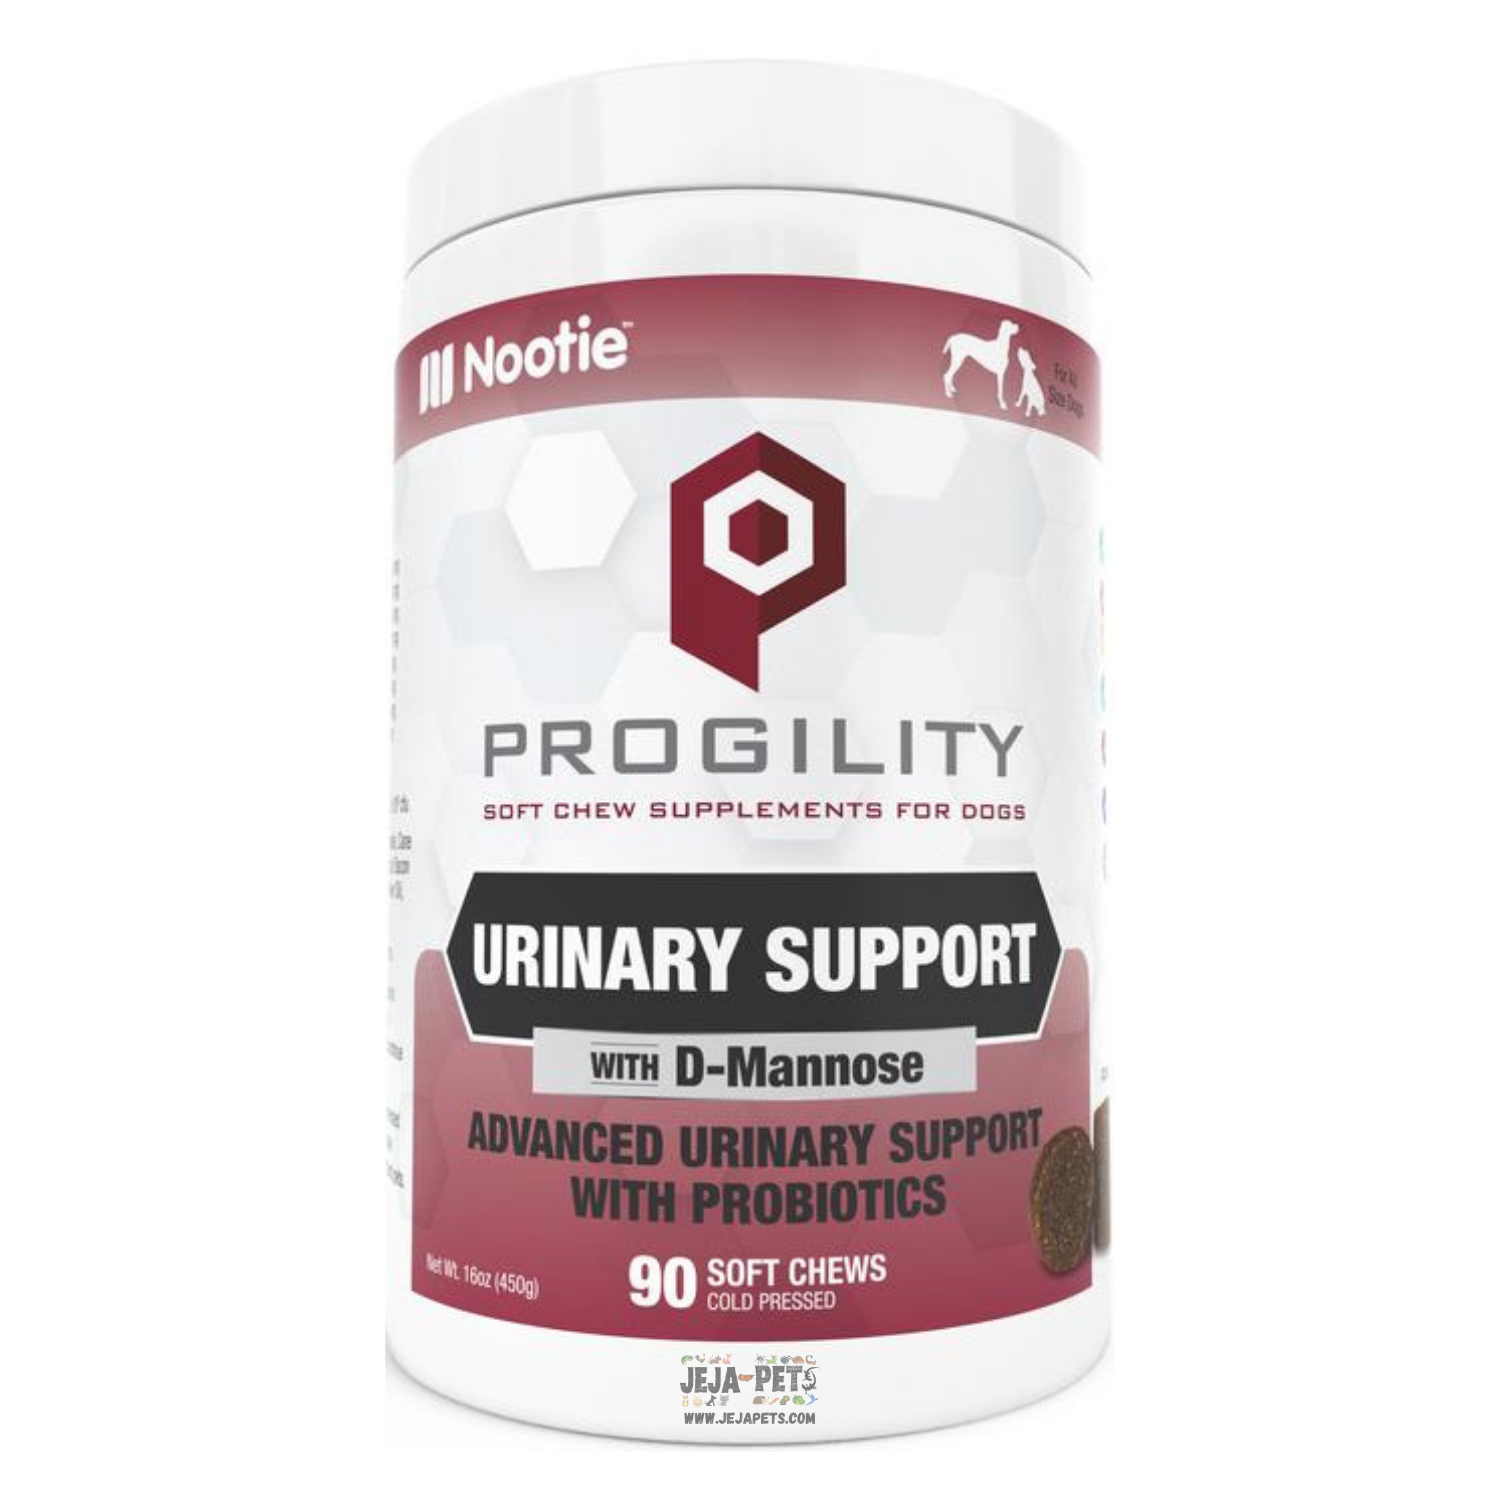 [DISCONTINUED] Nootie Progility Dog Urinary Support - 90 Soft Chews